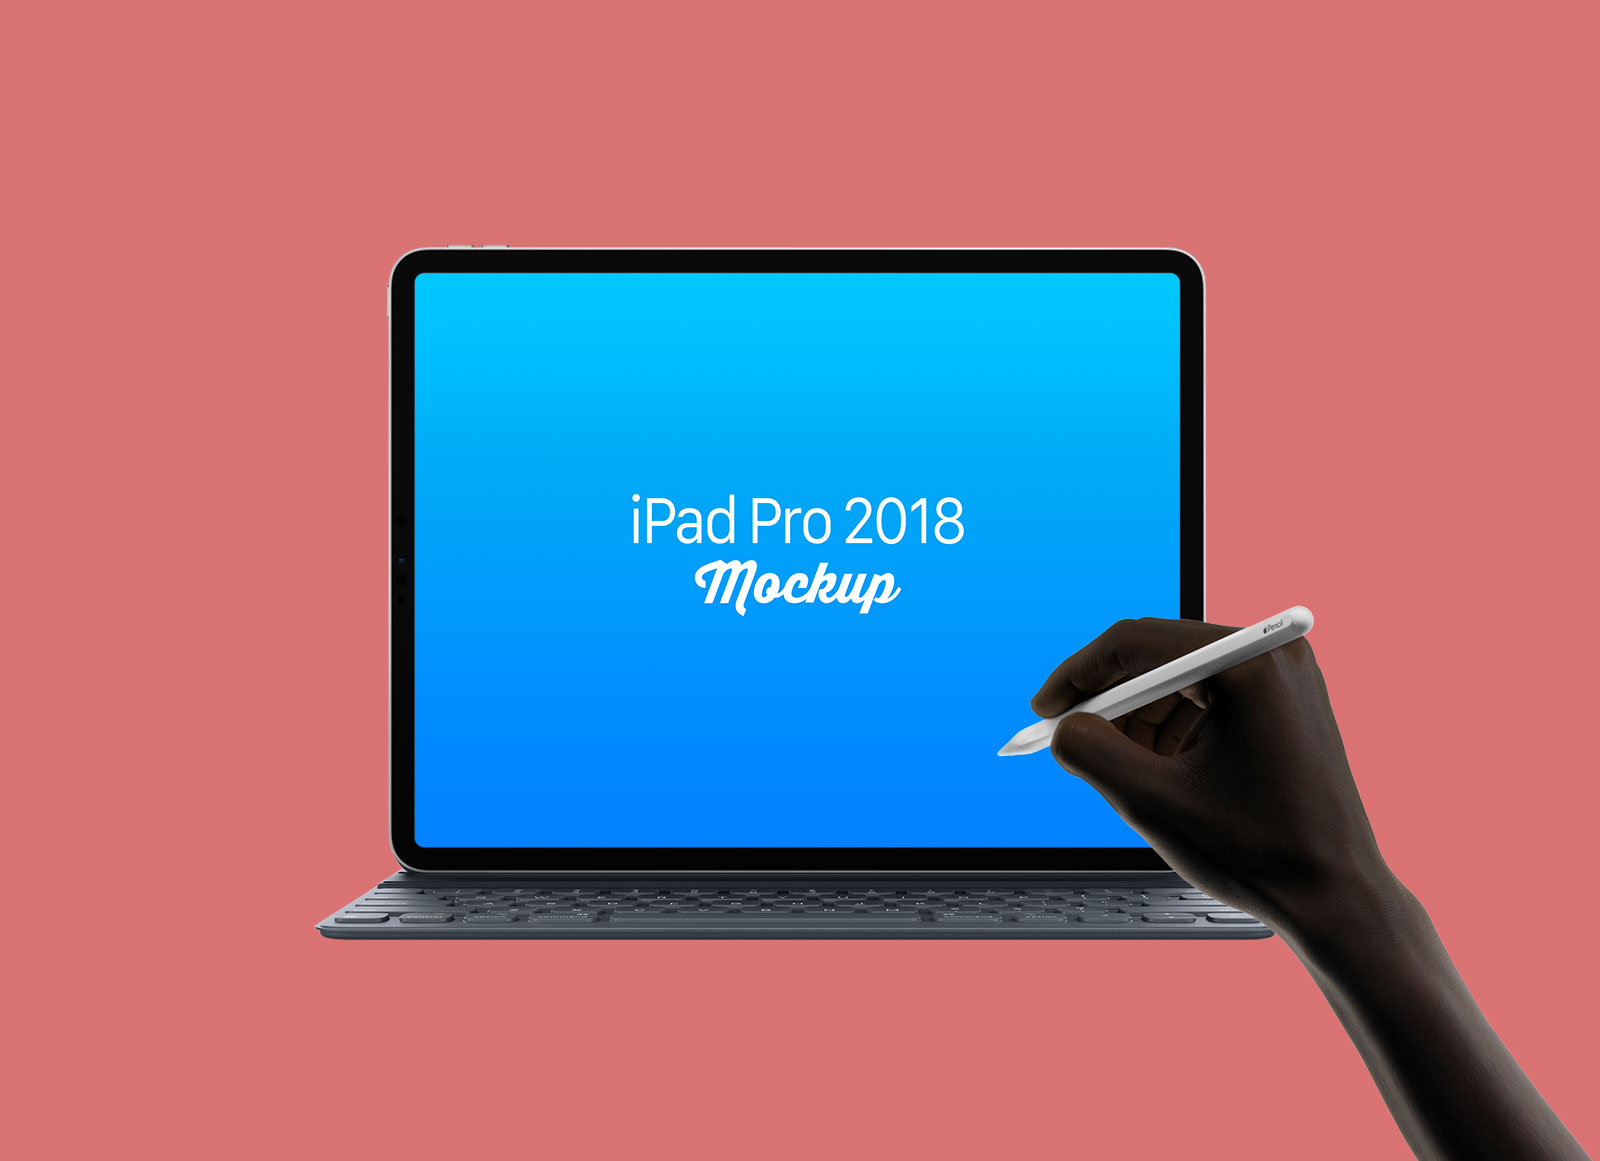 Free-iPad-Pro-2018-Mockup-with-Apple-Pencil-in-Hand-PSD-Set-2